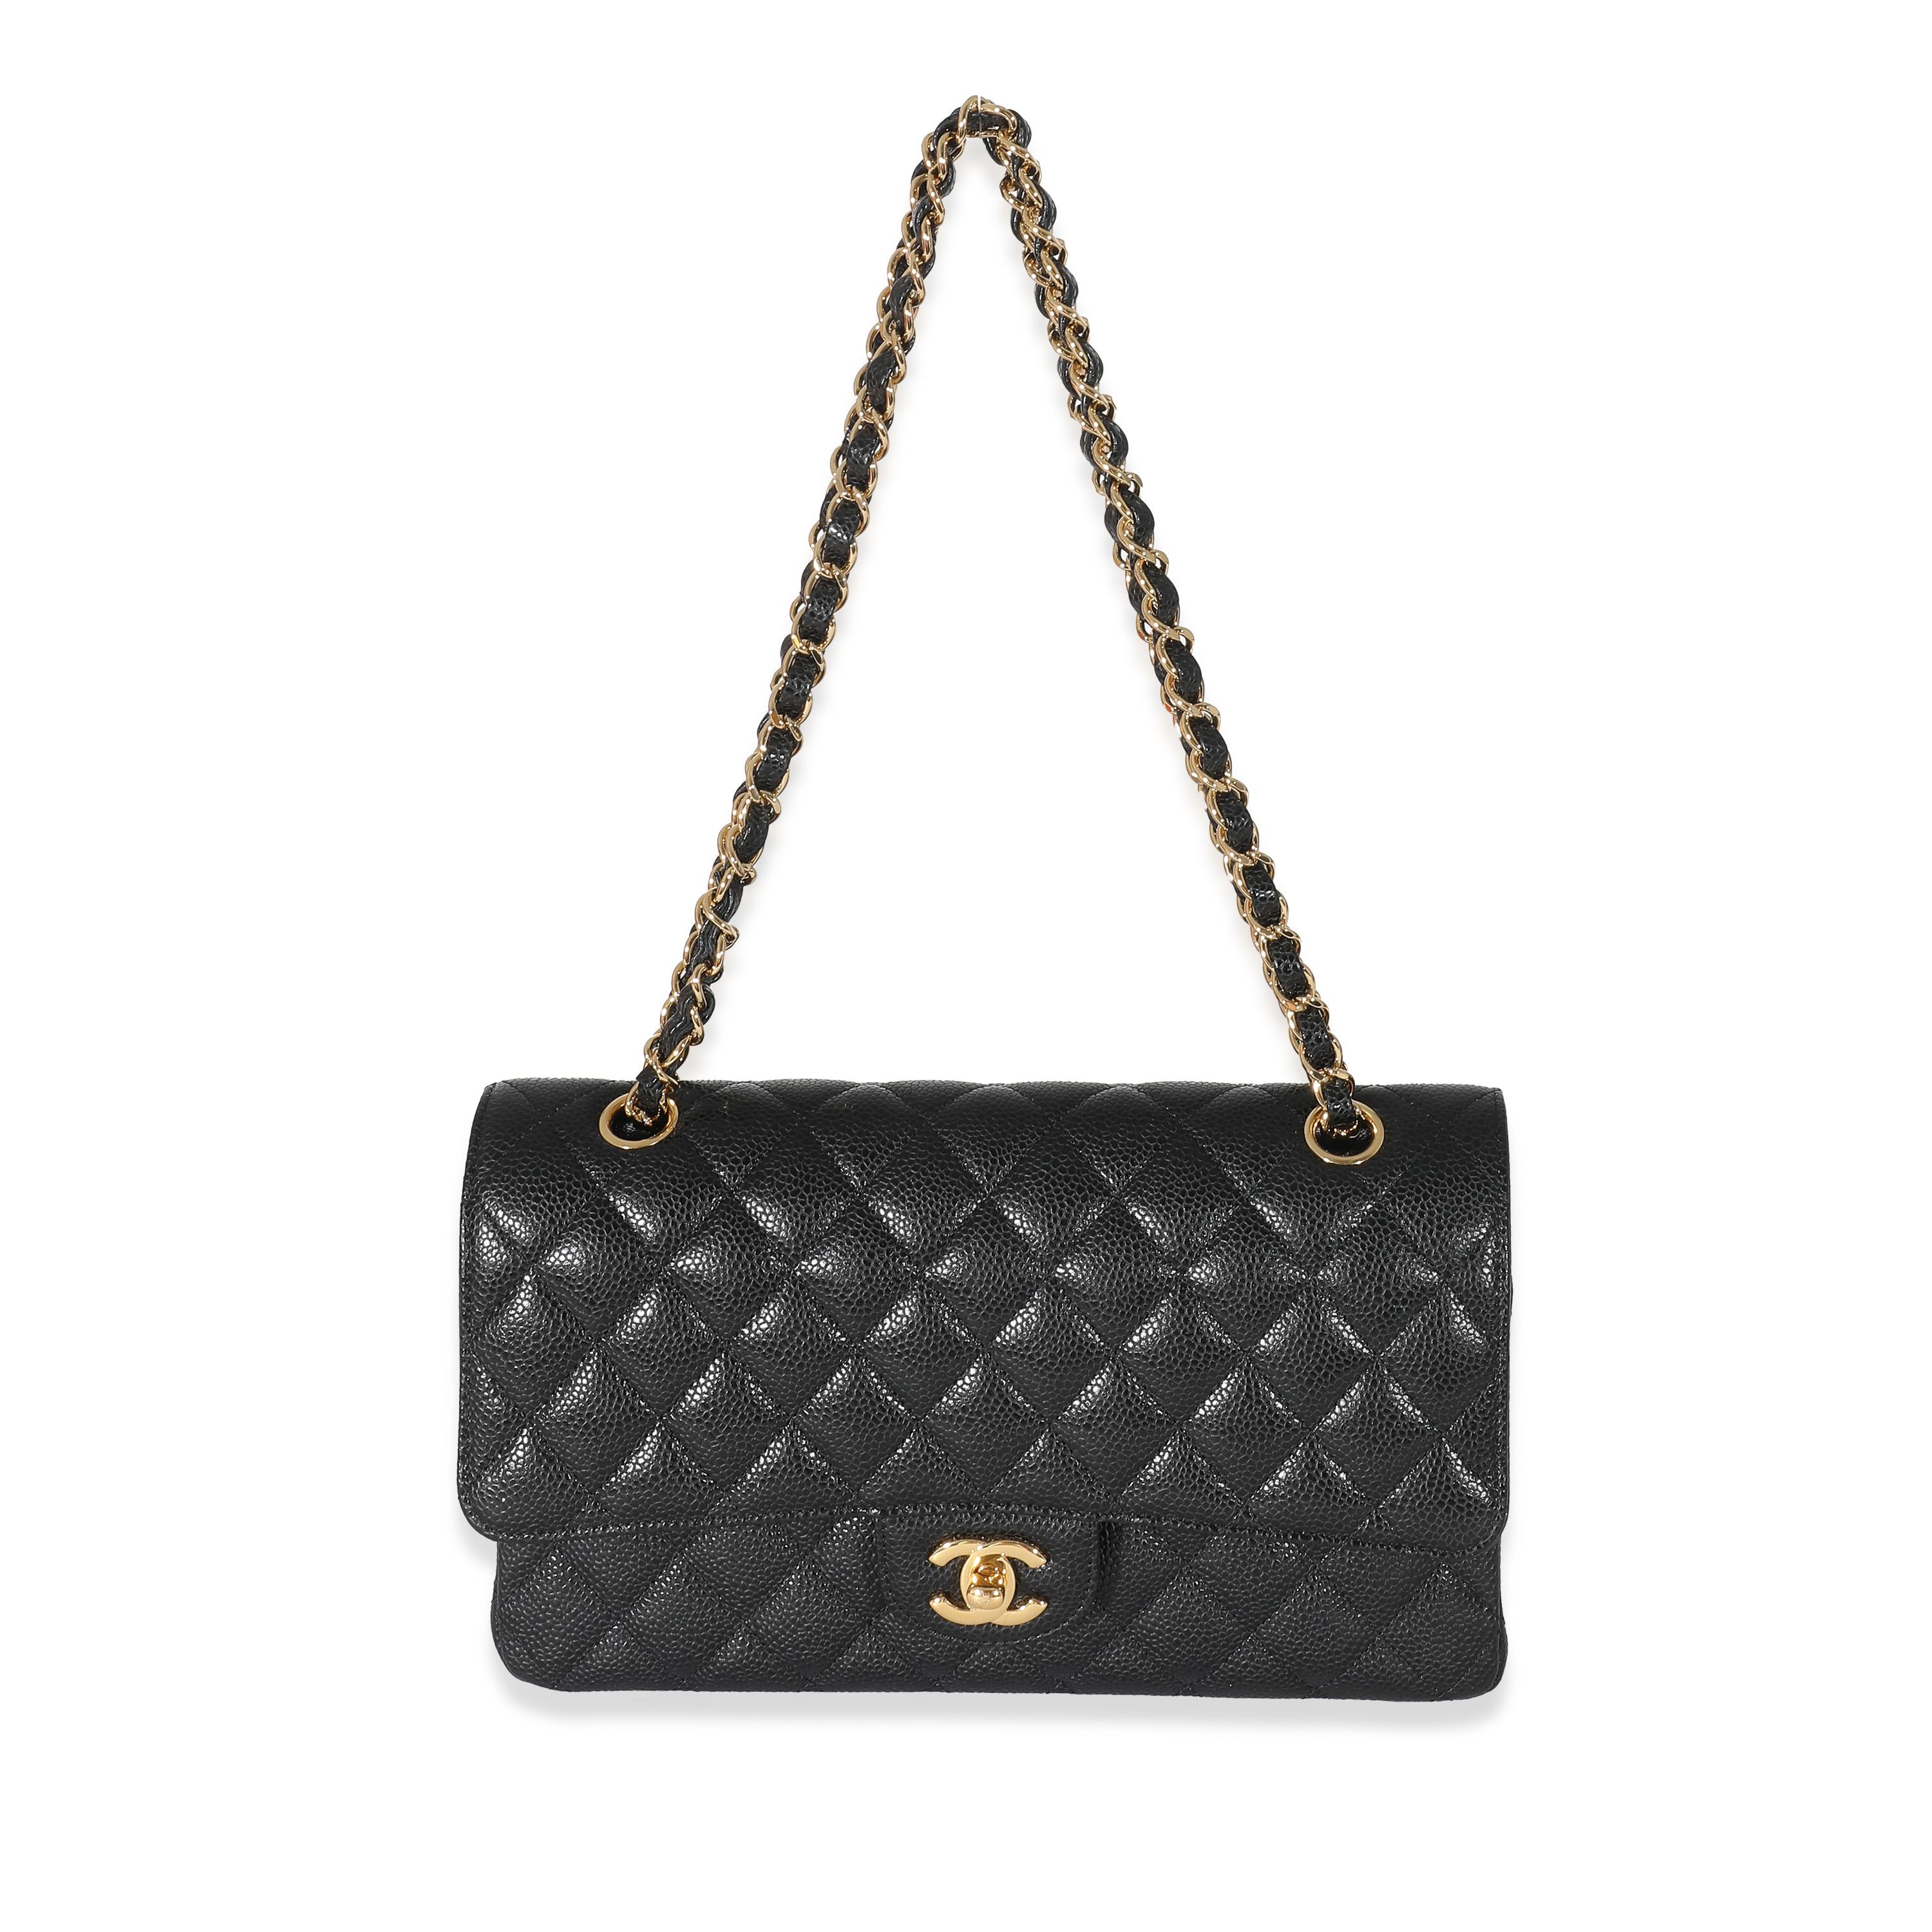 Listing Title: Chanel Black Caviar Medium Classic Double Flap Bag
SKU: 134003
MSRP: 10200.00 USD
Condition: Pre-owned 
Handbag Condition: Very Good
Condition Comments: Item is in very good condition with minor signs of wear. Exterior light corner